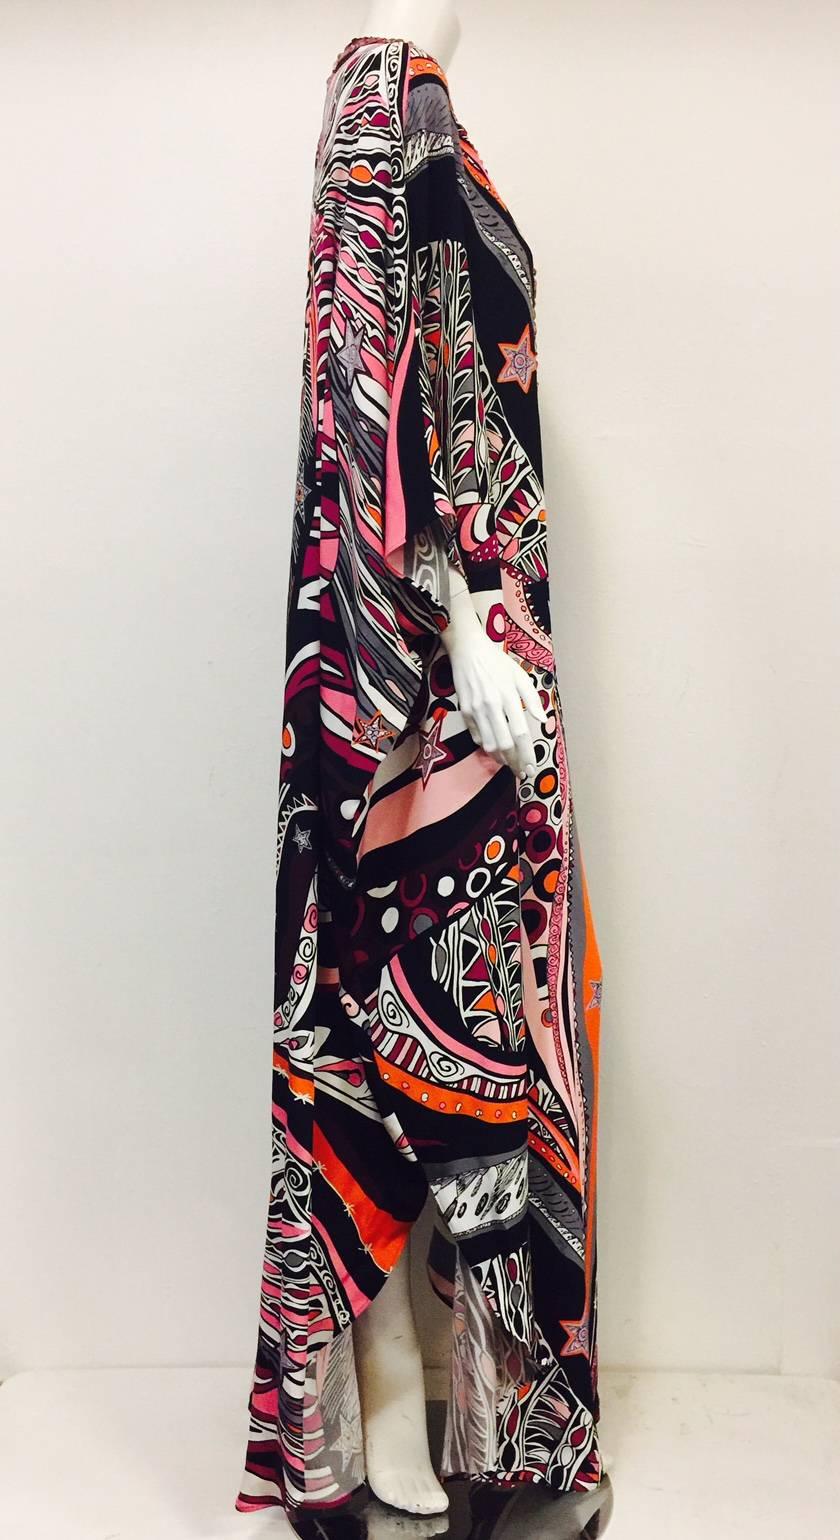 NWT Silk Abstract Print Caftan With Embellishments is highly desired by aficionados of all things Pucci!  Features ultra-luxurious, weighty silk and a signature, colorful Pucci print allover.  Seasonless color scheme works equally well in all